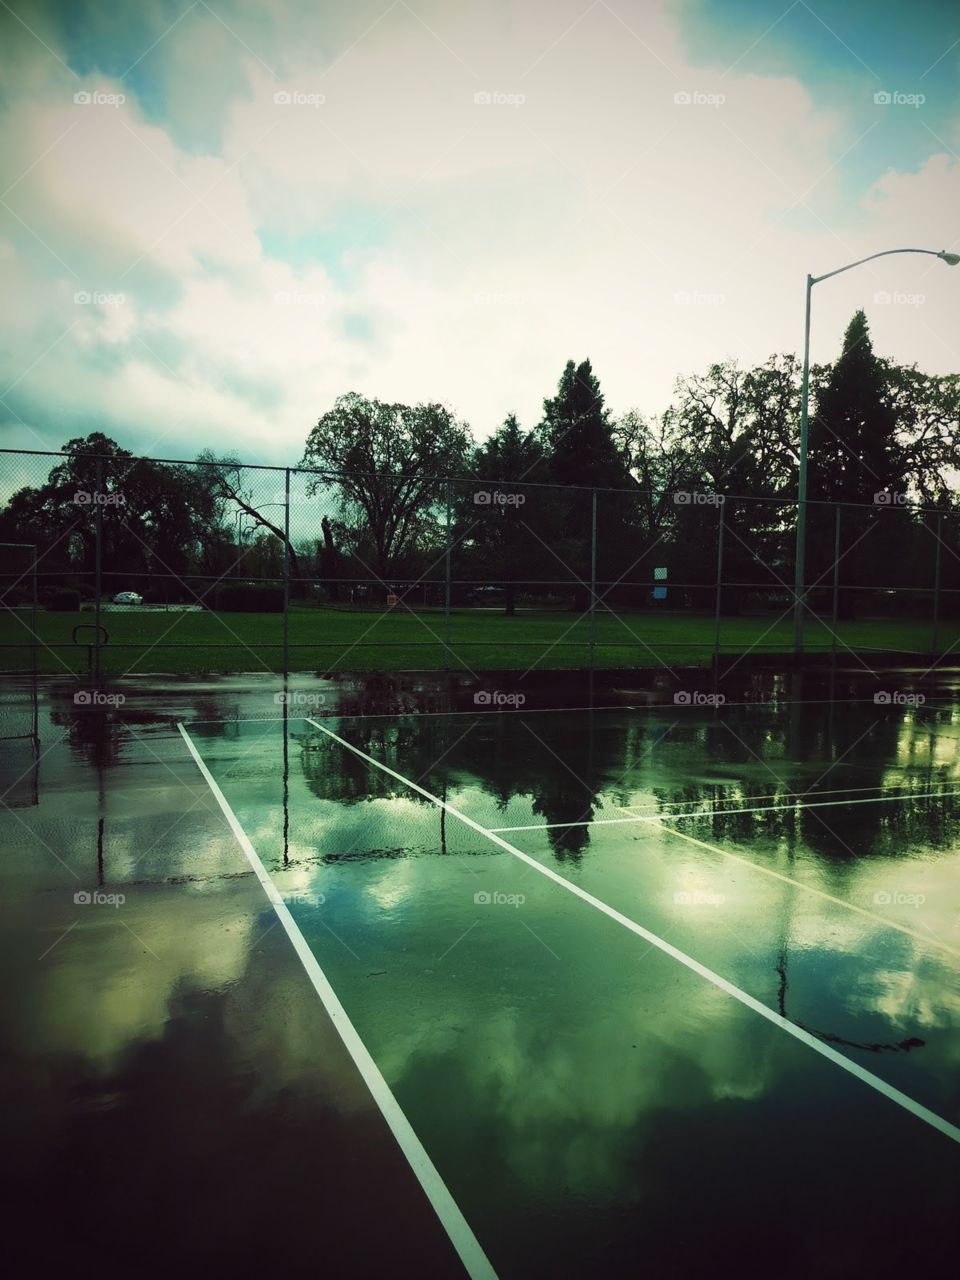 Reflection Collection. Tennis Court Reflection After Rain